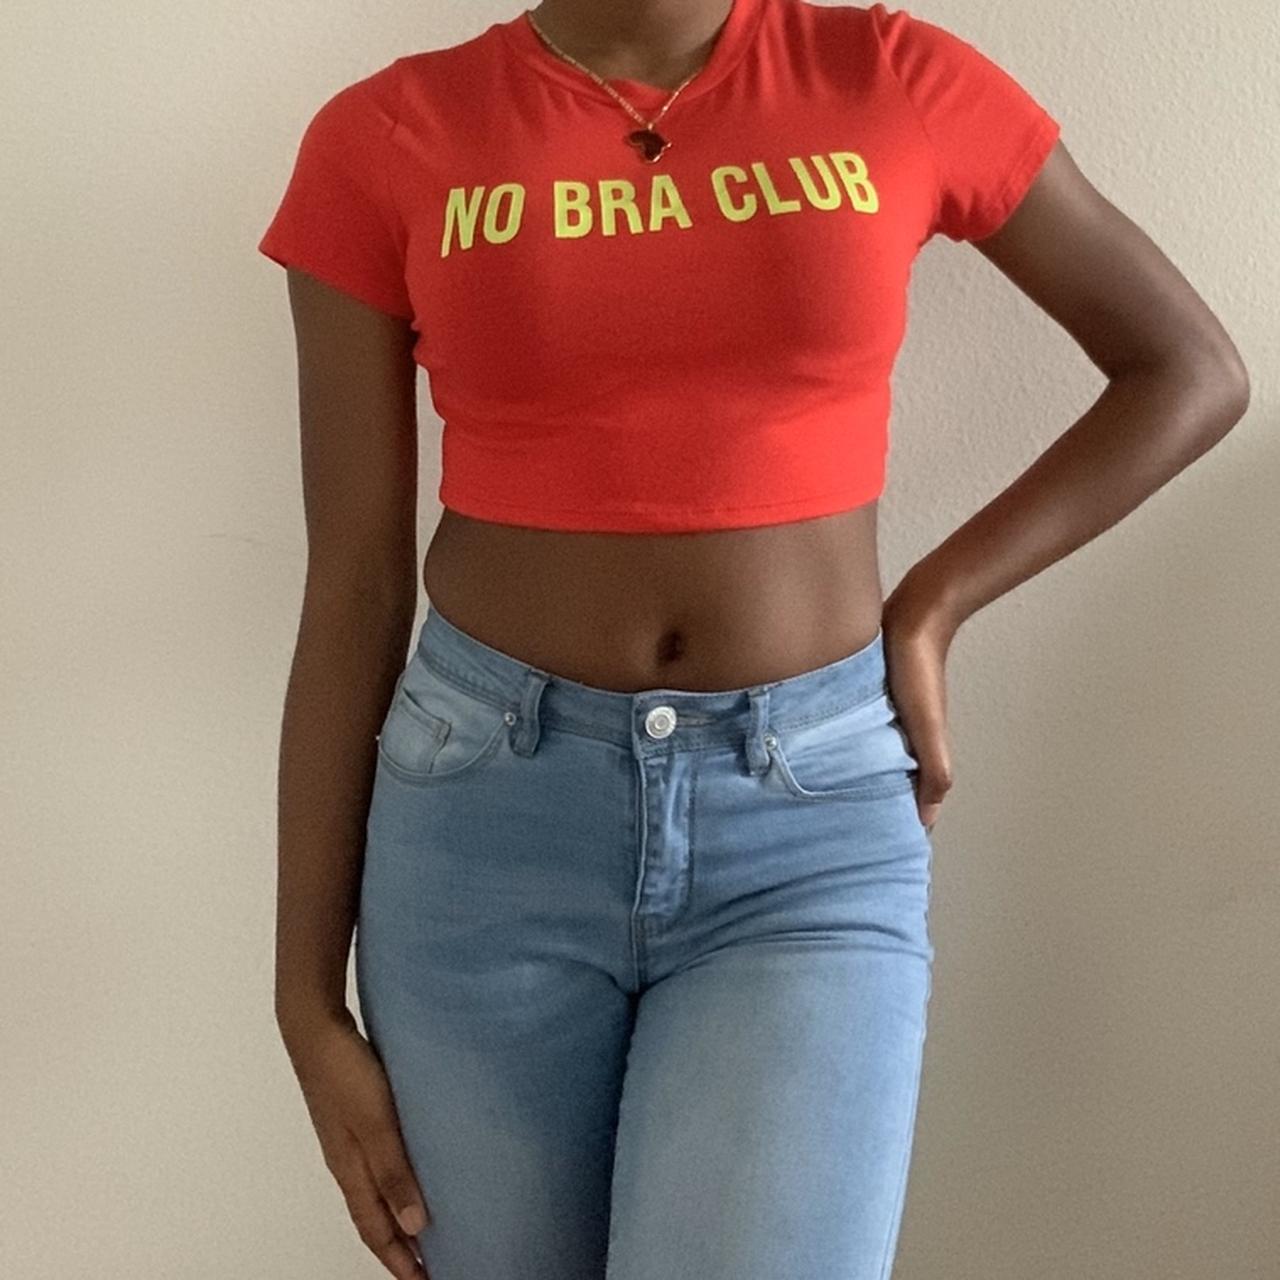 No Bra Club” is Now a Thing on Instagram.